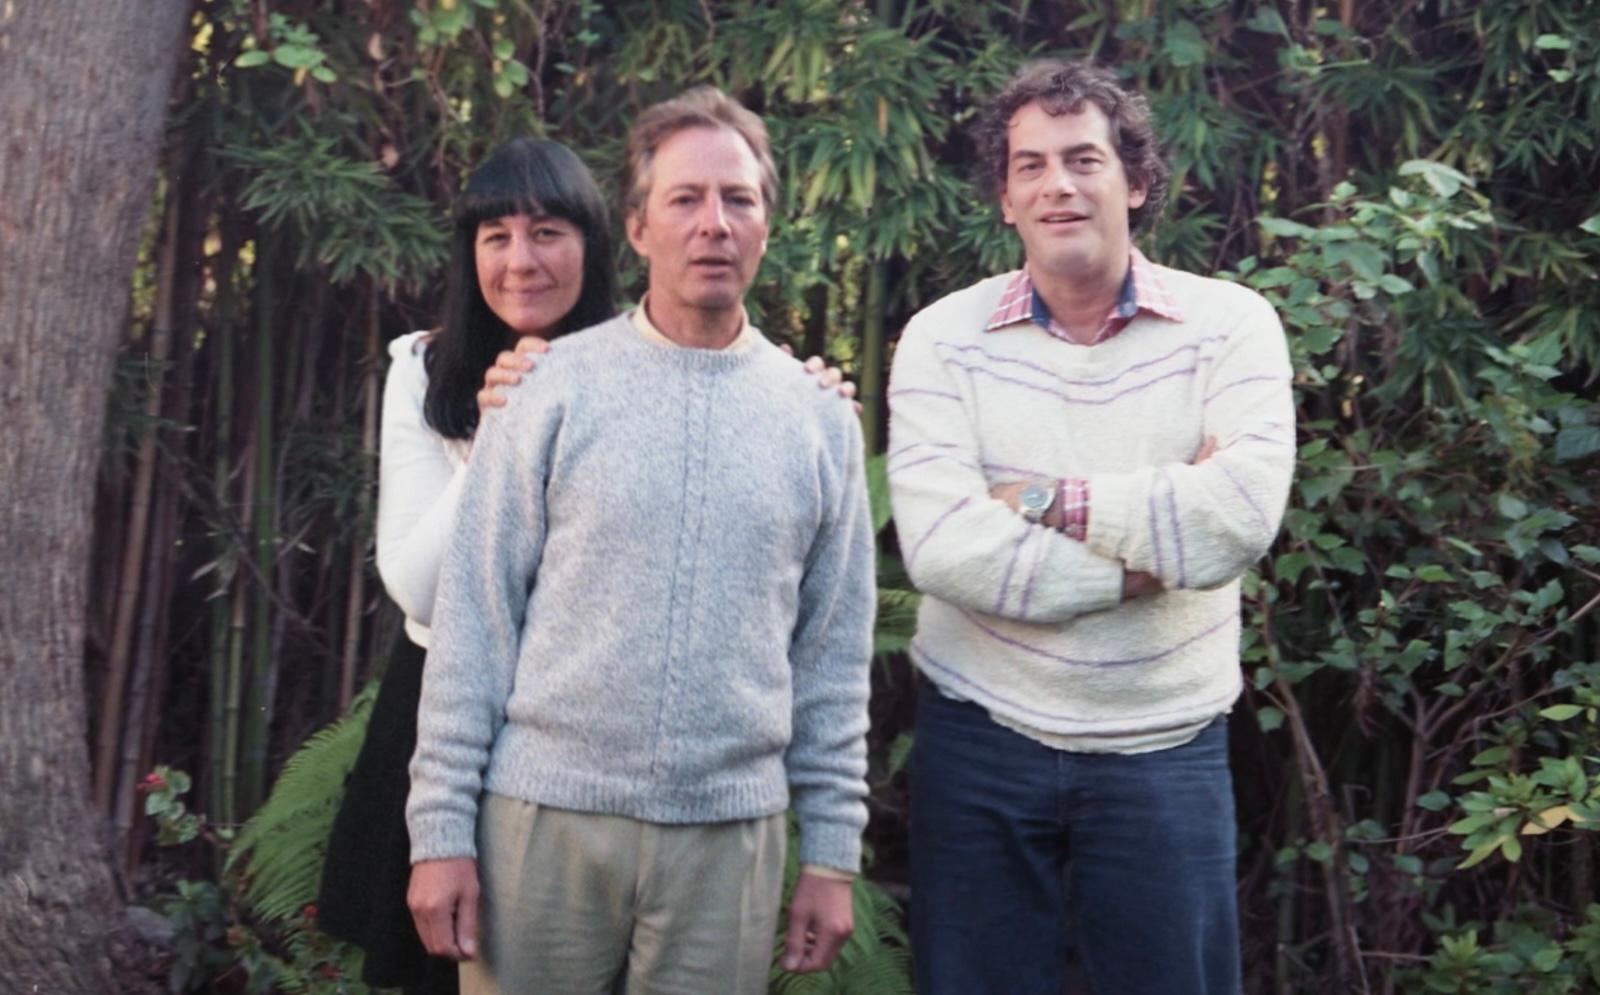 Susan, Bob, and Nick photo, as shown in The Jinx